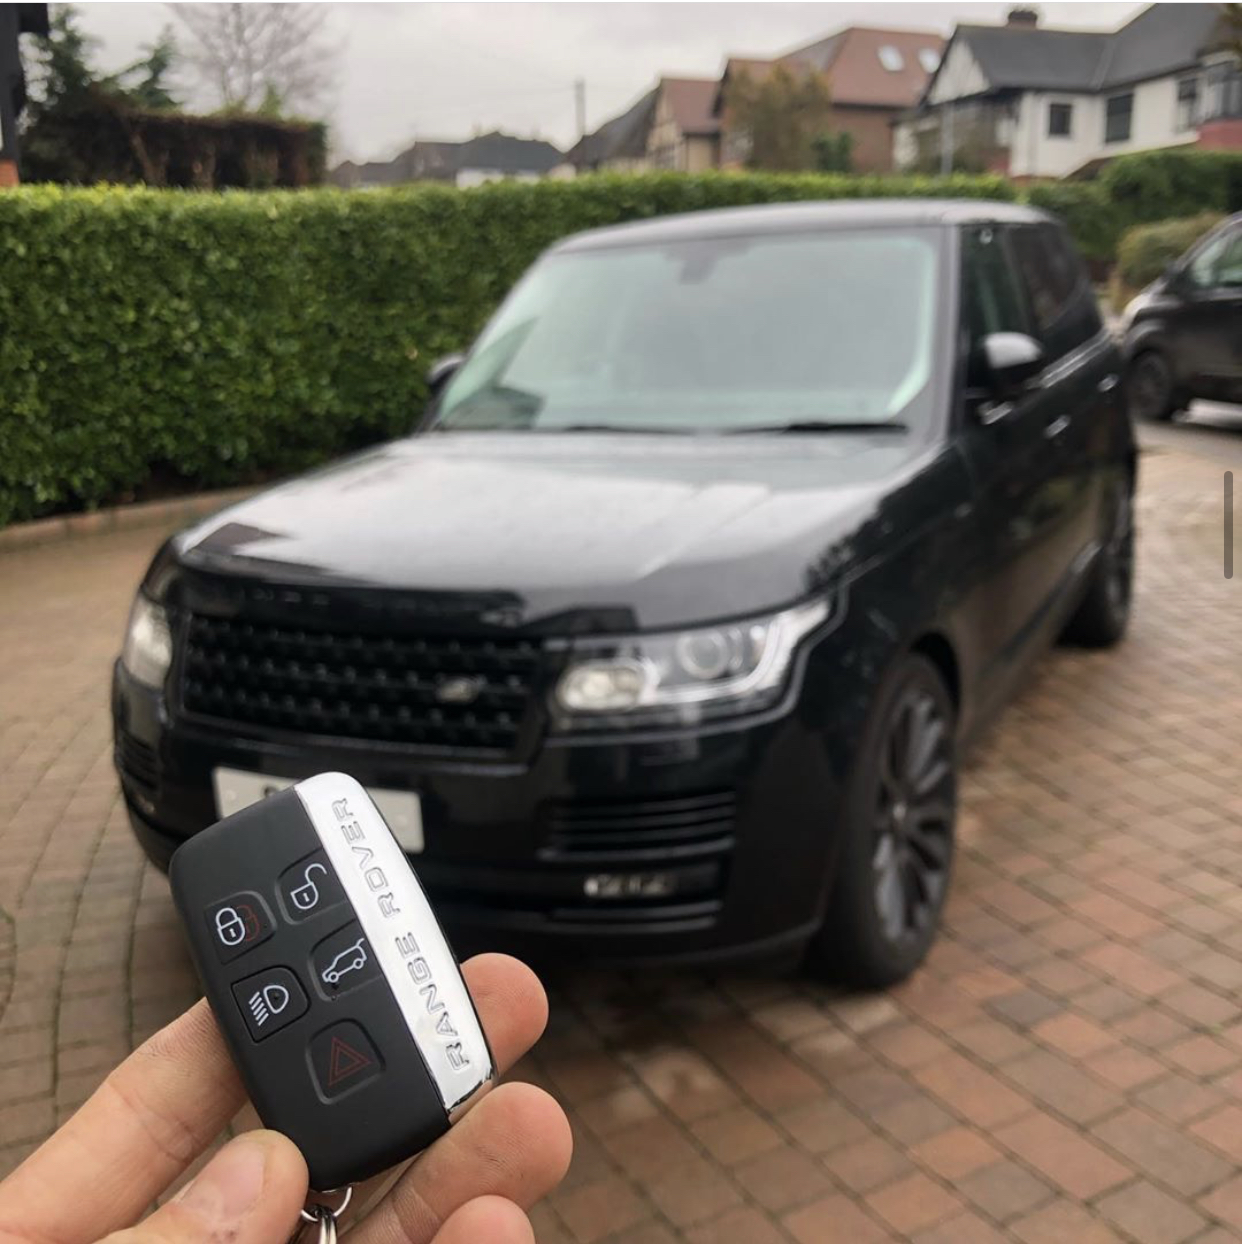 Range Rover key replacement cost